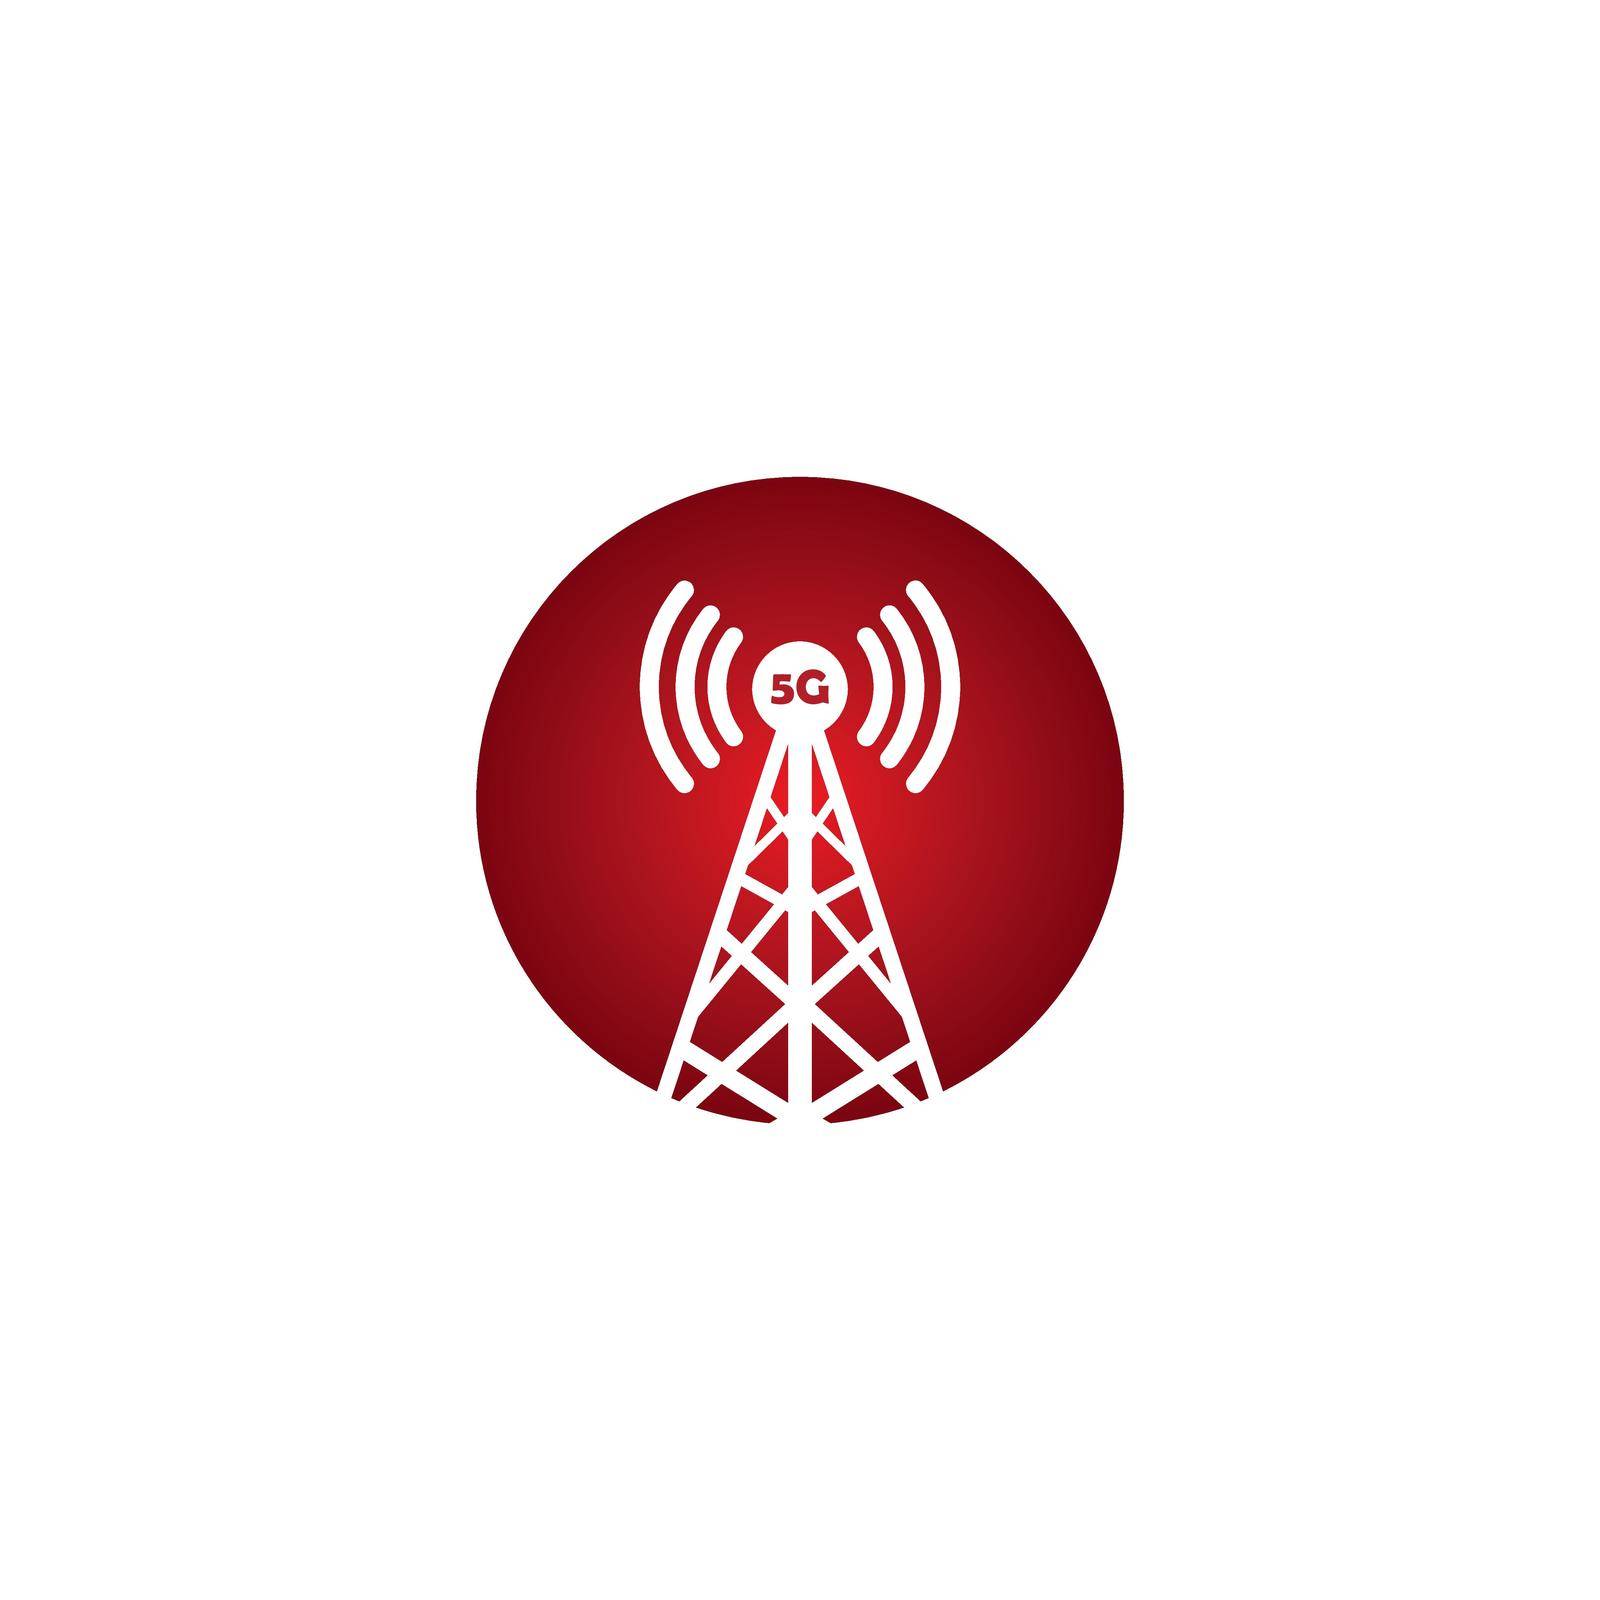 Network tower icon,vector illustration simple design.